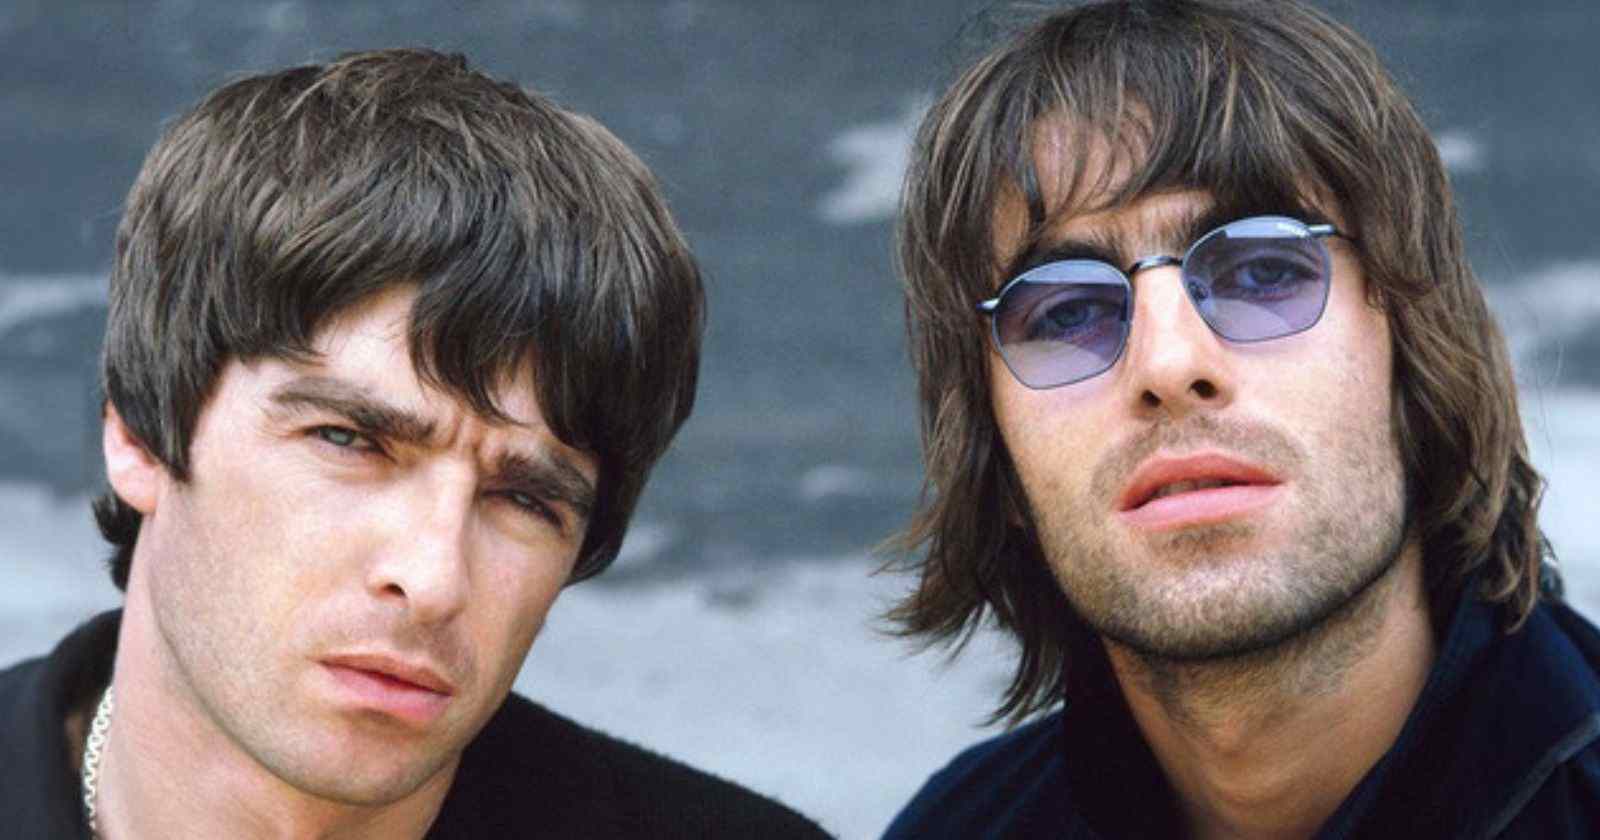 Liam Gallagher and Noel